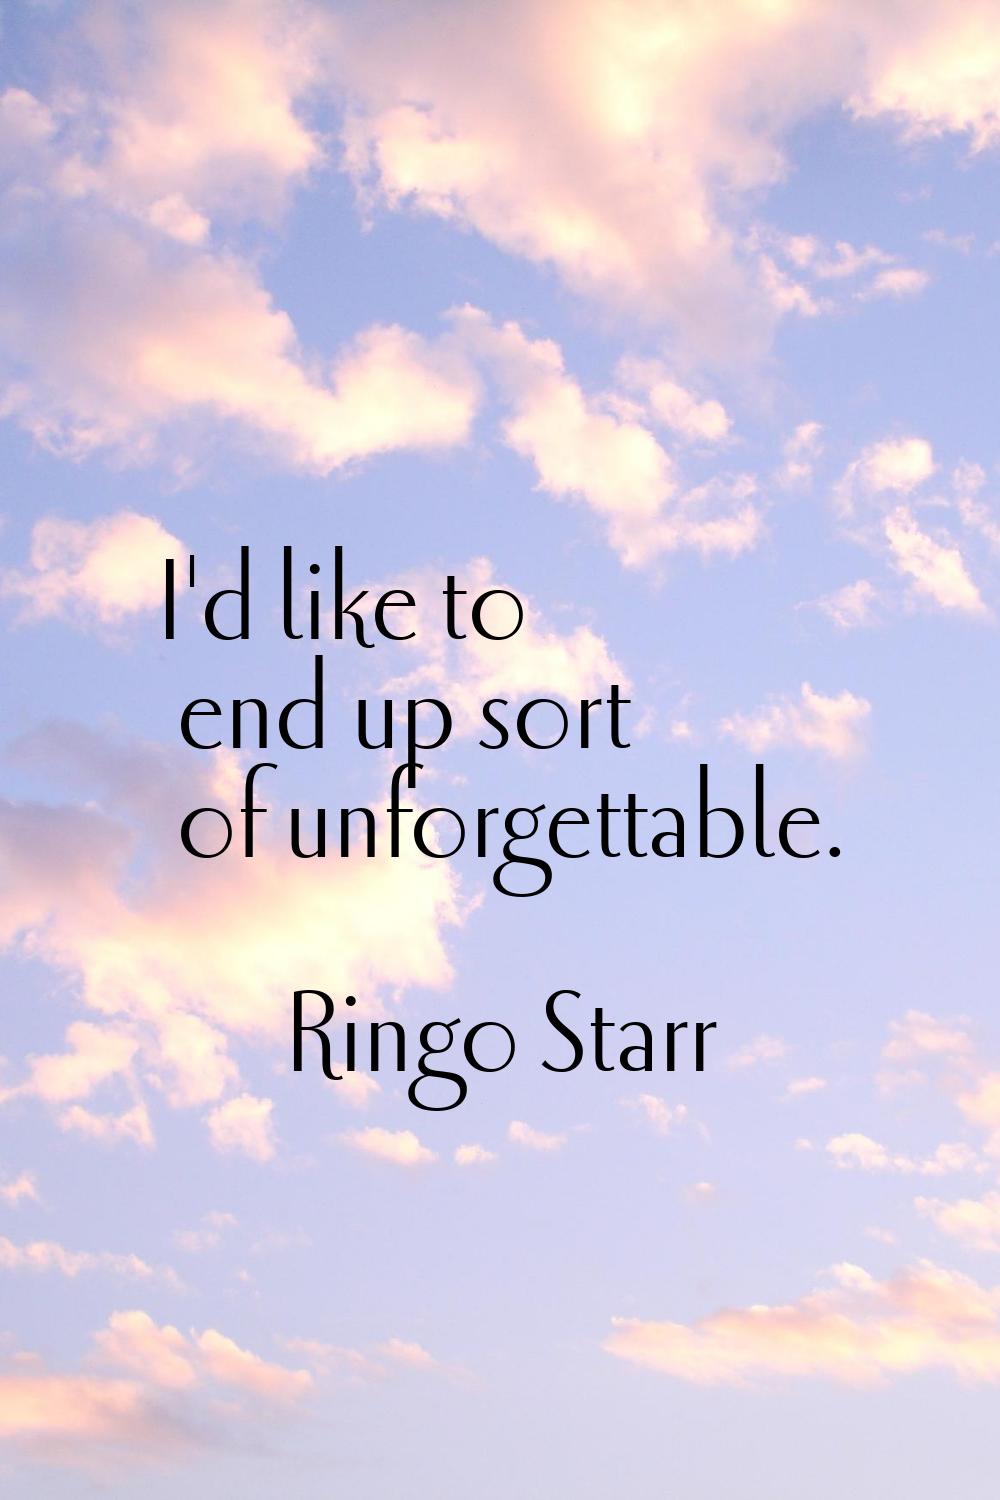 I'd like to end up sort of unforgettable.